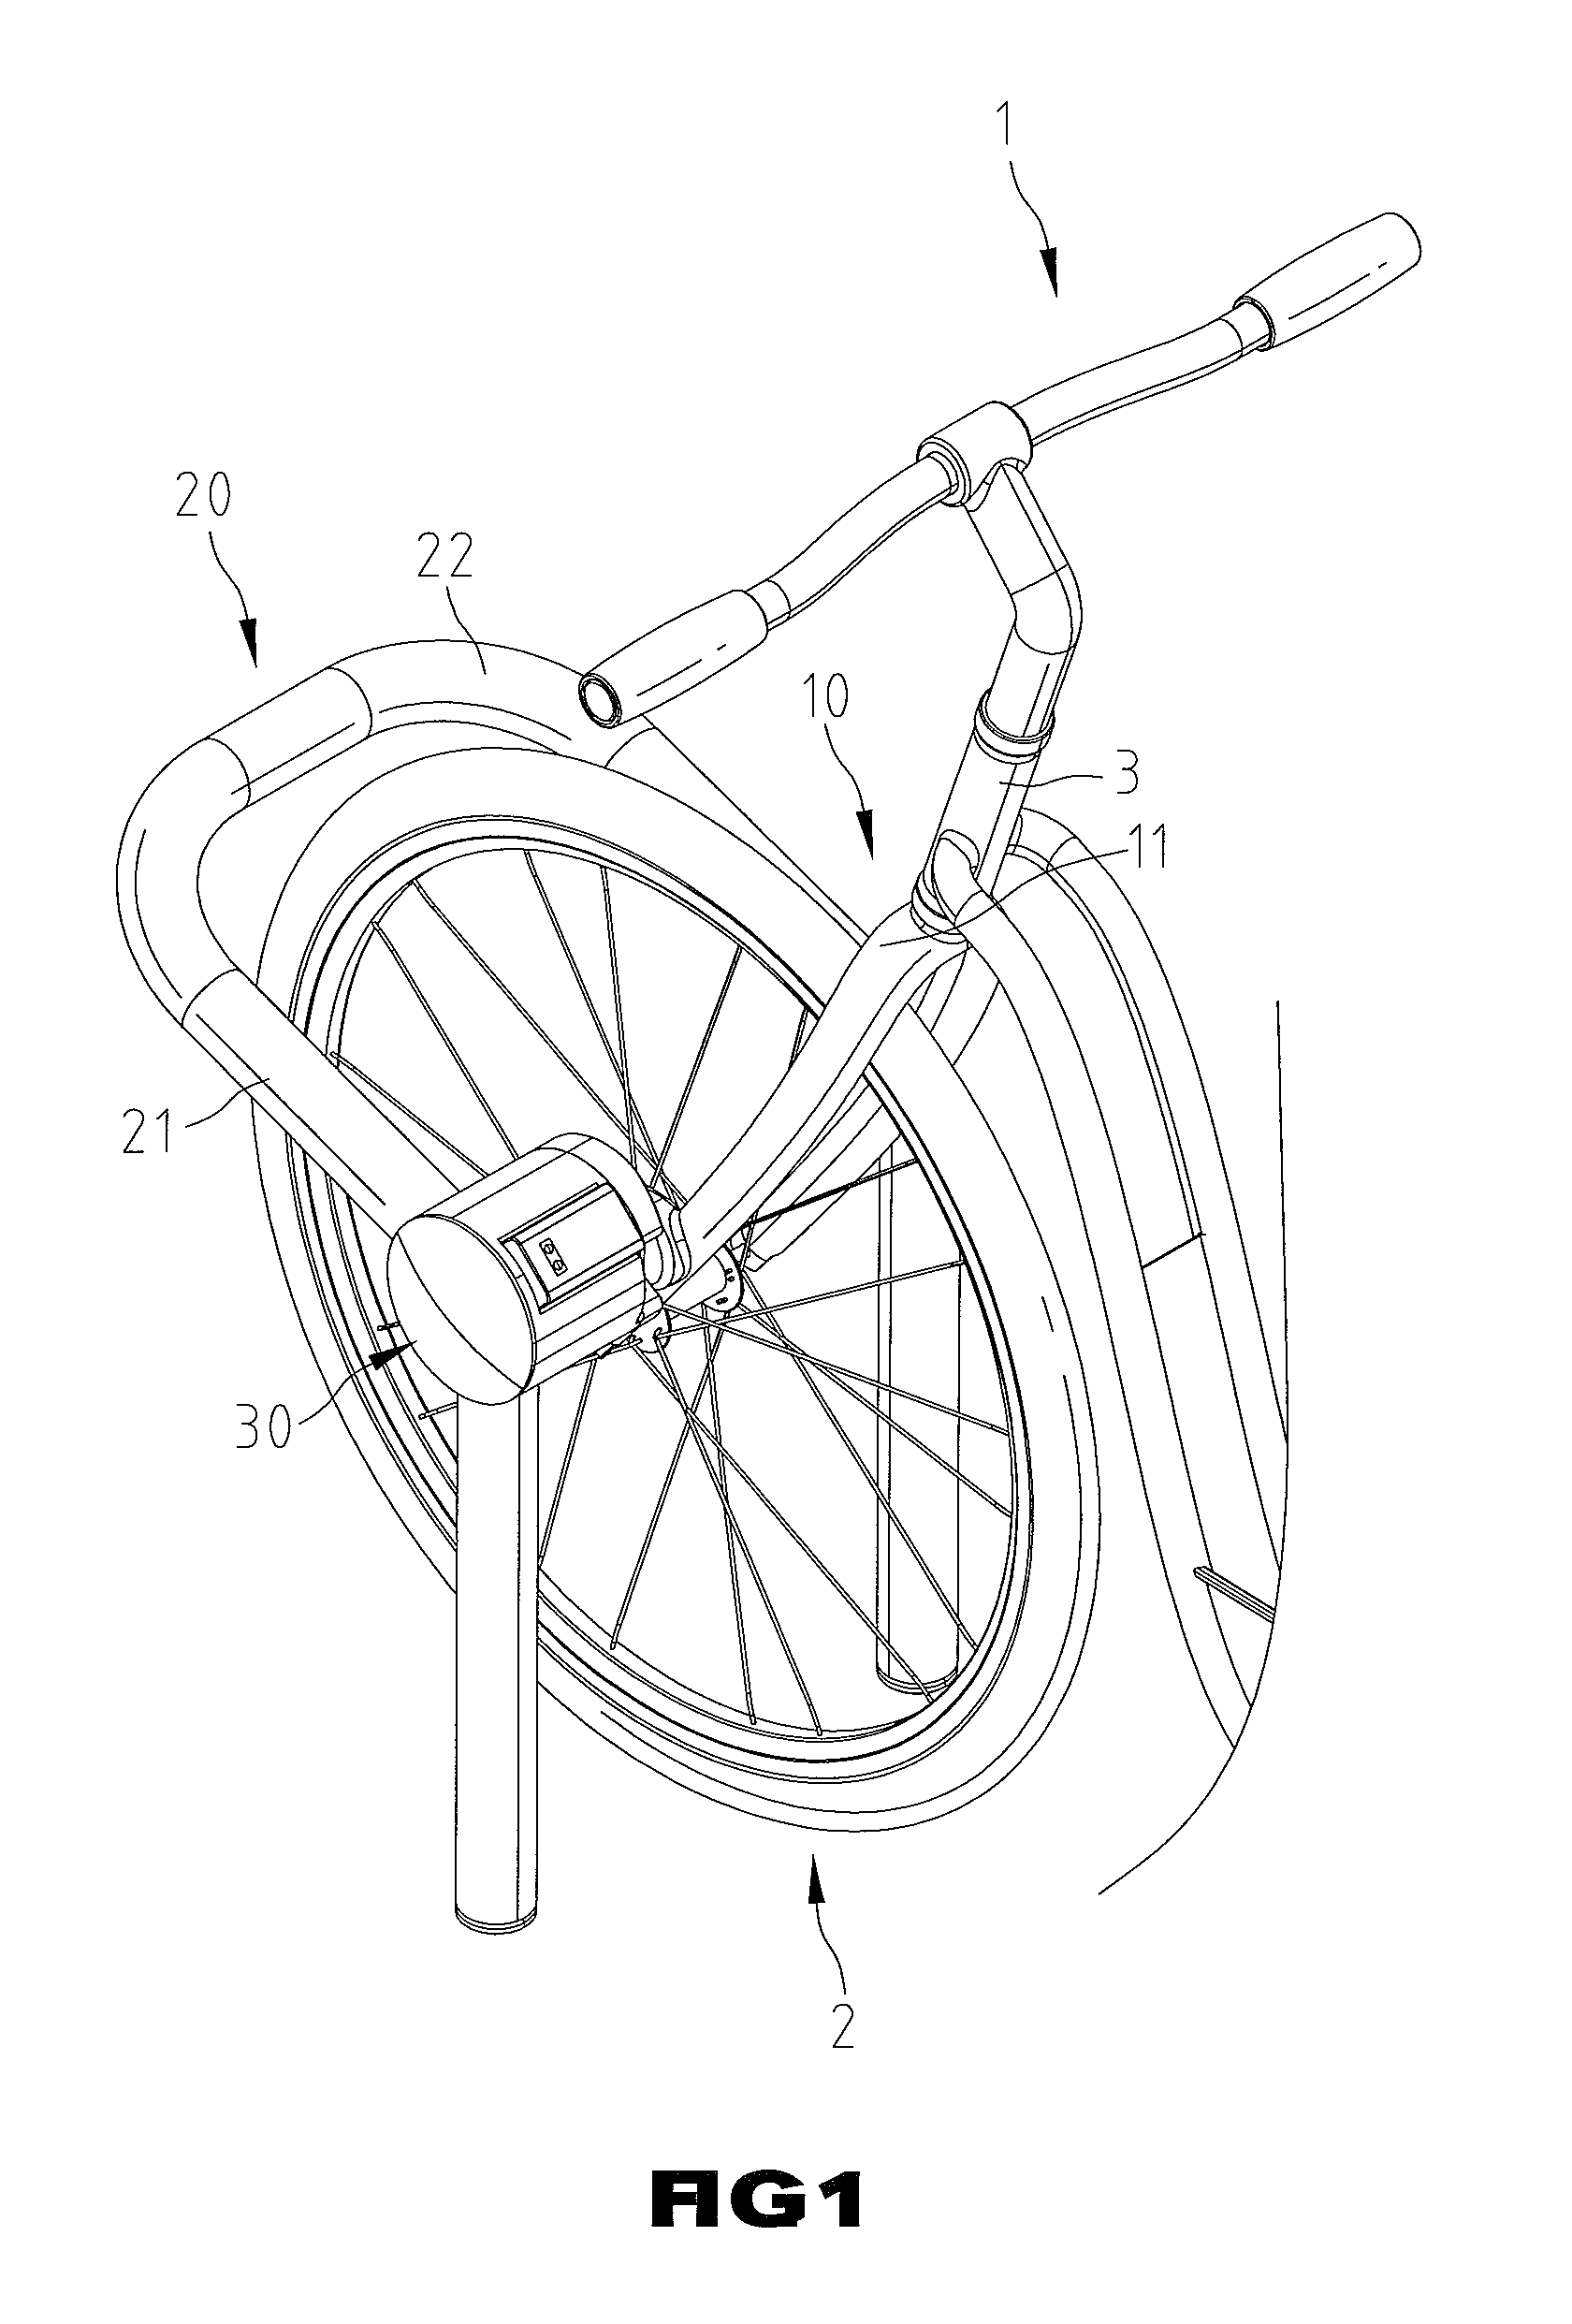 Combination of Fixture Member for Bicycle and Locking Apparatus for Bicycle Parking Rack